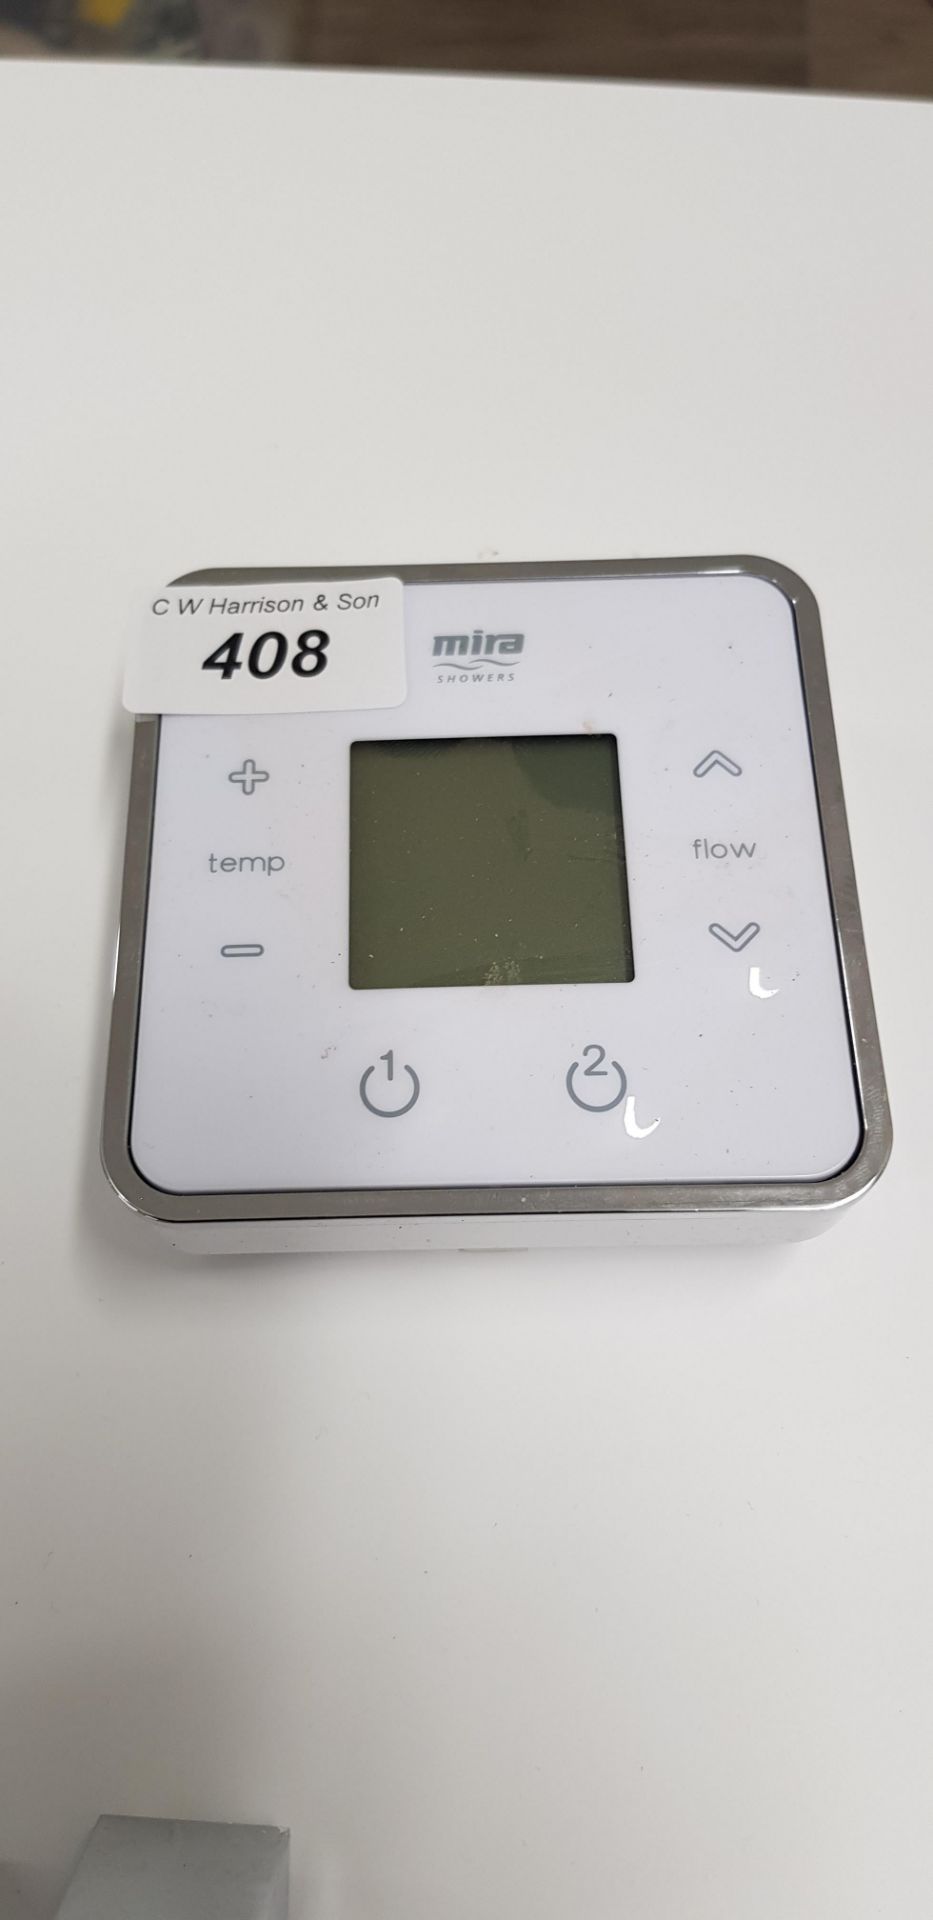 Mira thermostatic heating controller